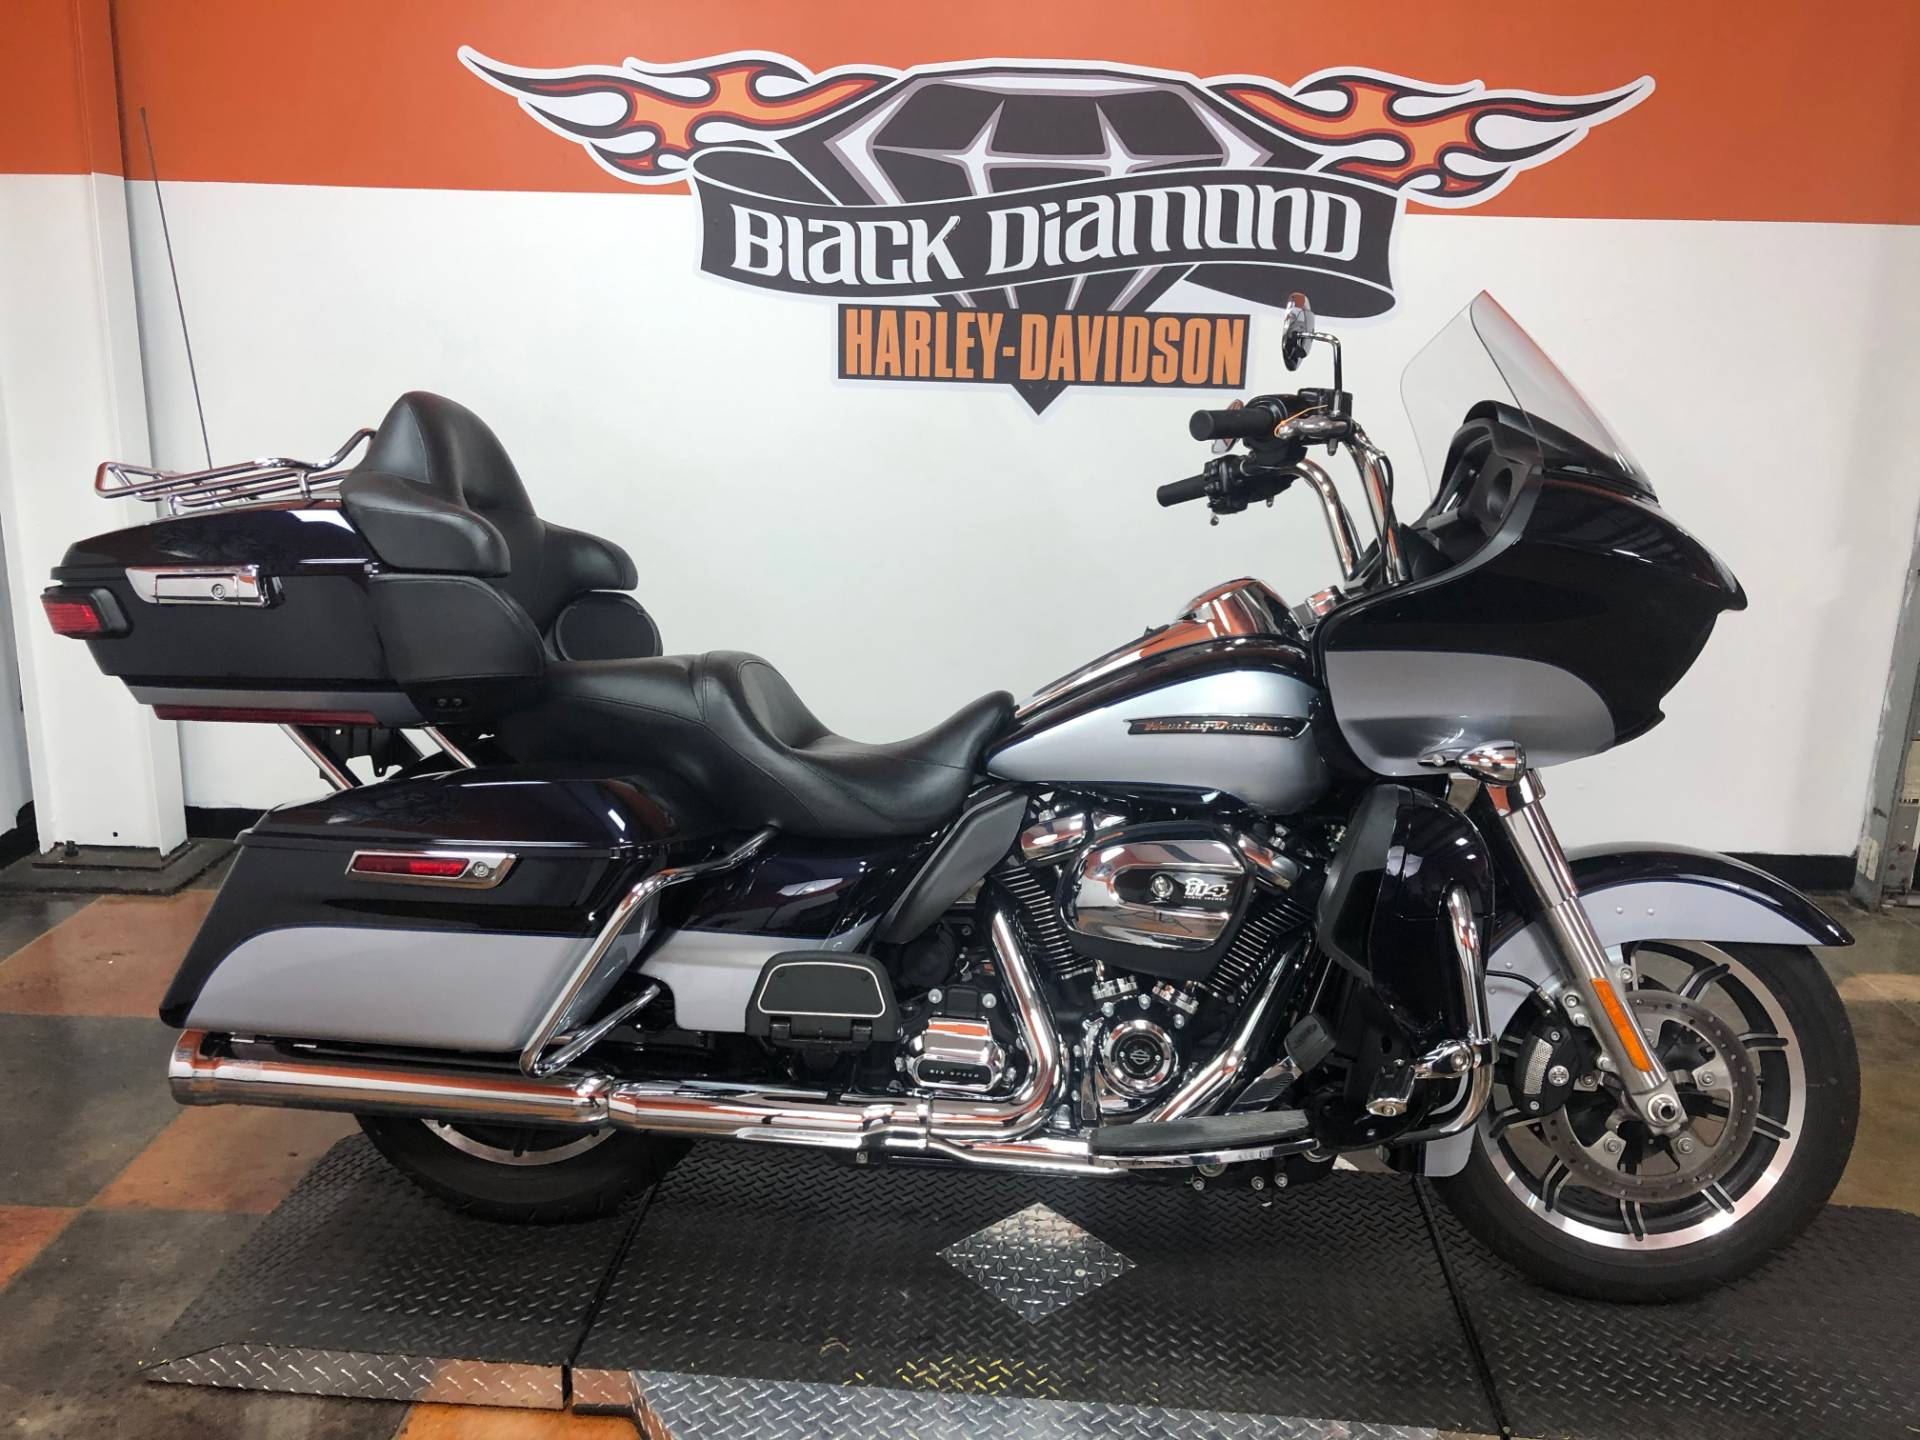 Used 2019 Harley Davidson Road Glide Ultra Silver Flux Black Fuse Motorcycles In Marion Il U665907